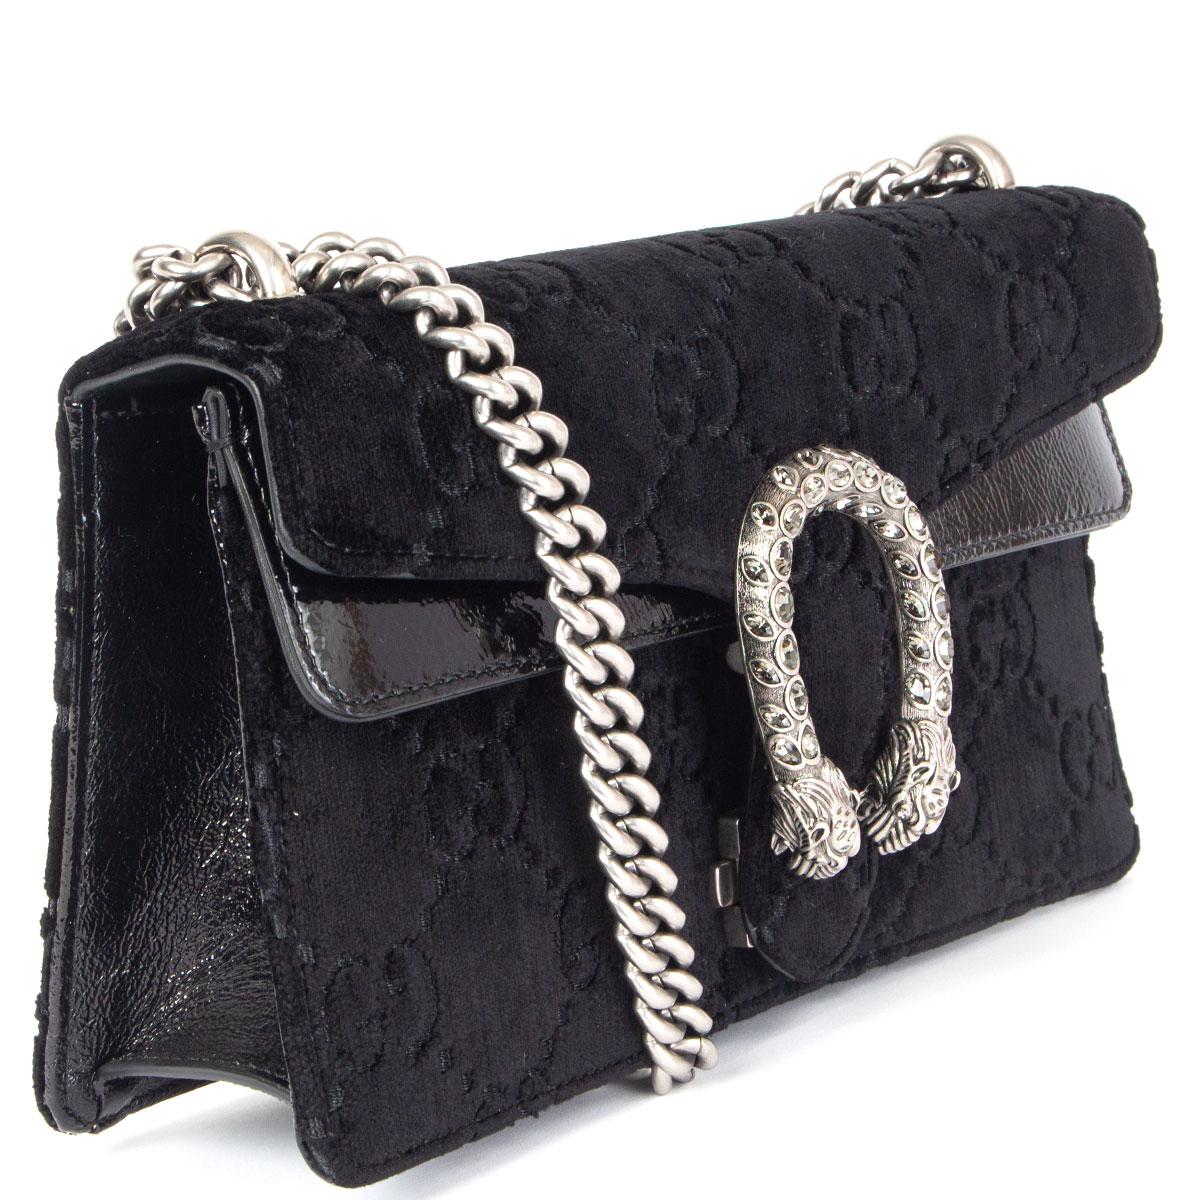 100% authentic Gucci 'Dionysus' small shoulder bag in black monogram embossed velvet and patent leather featuring the classic silver-tone tiger's head clasp embellished with crystals. - It's inspired by the ancient Greek god Dionysus. Opens with